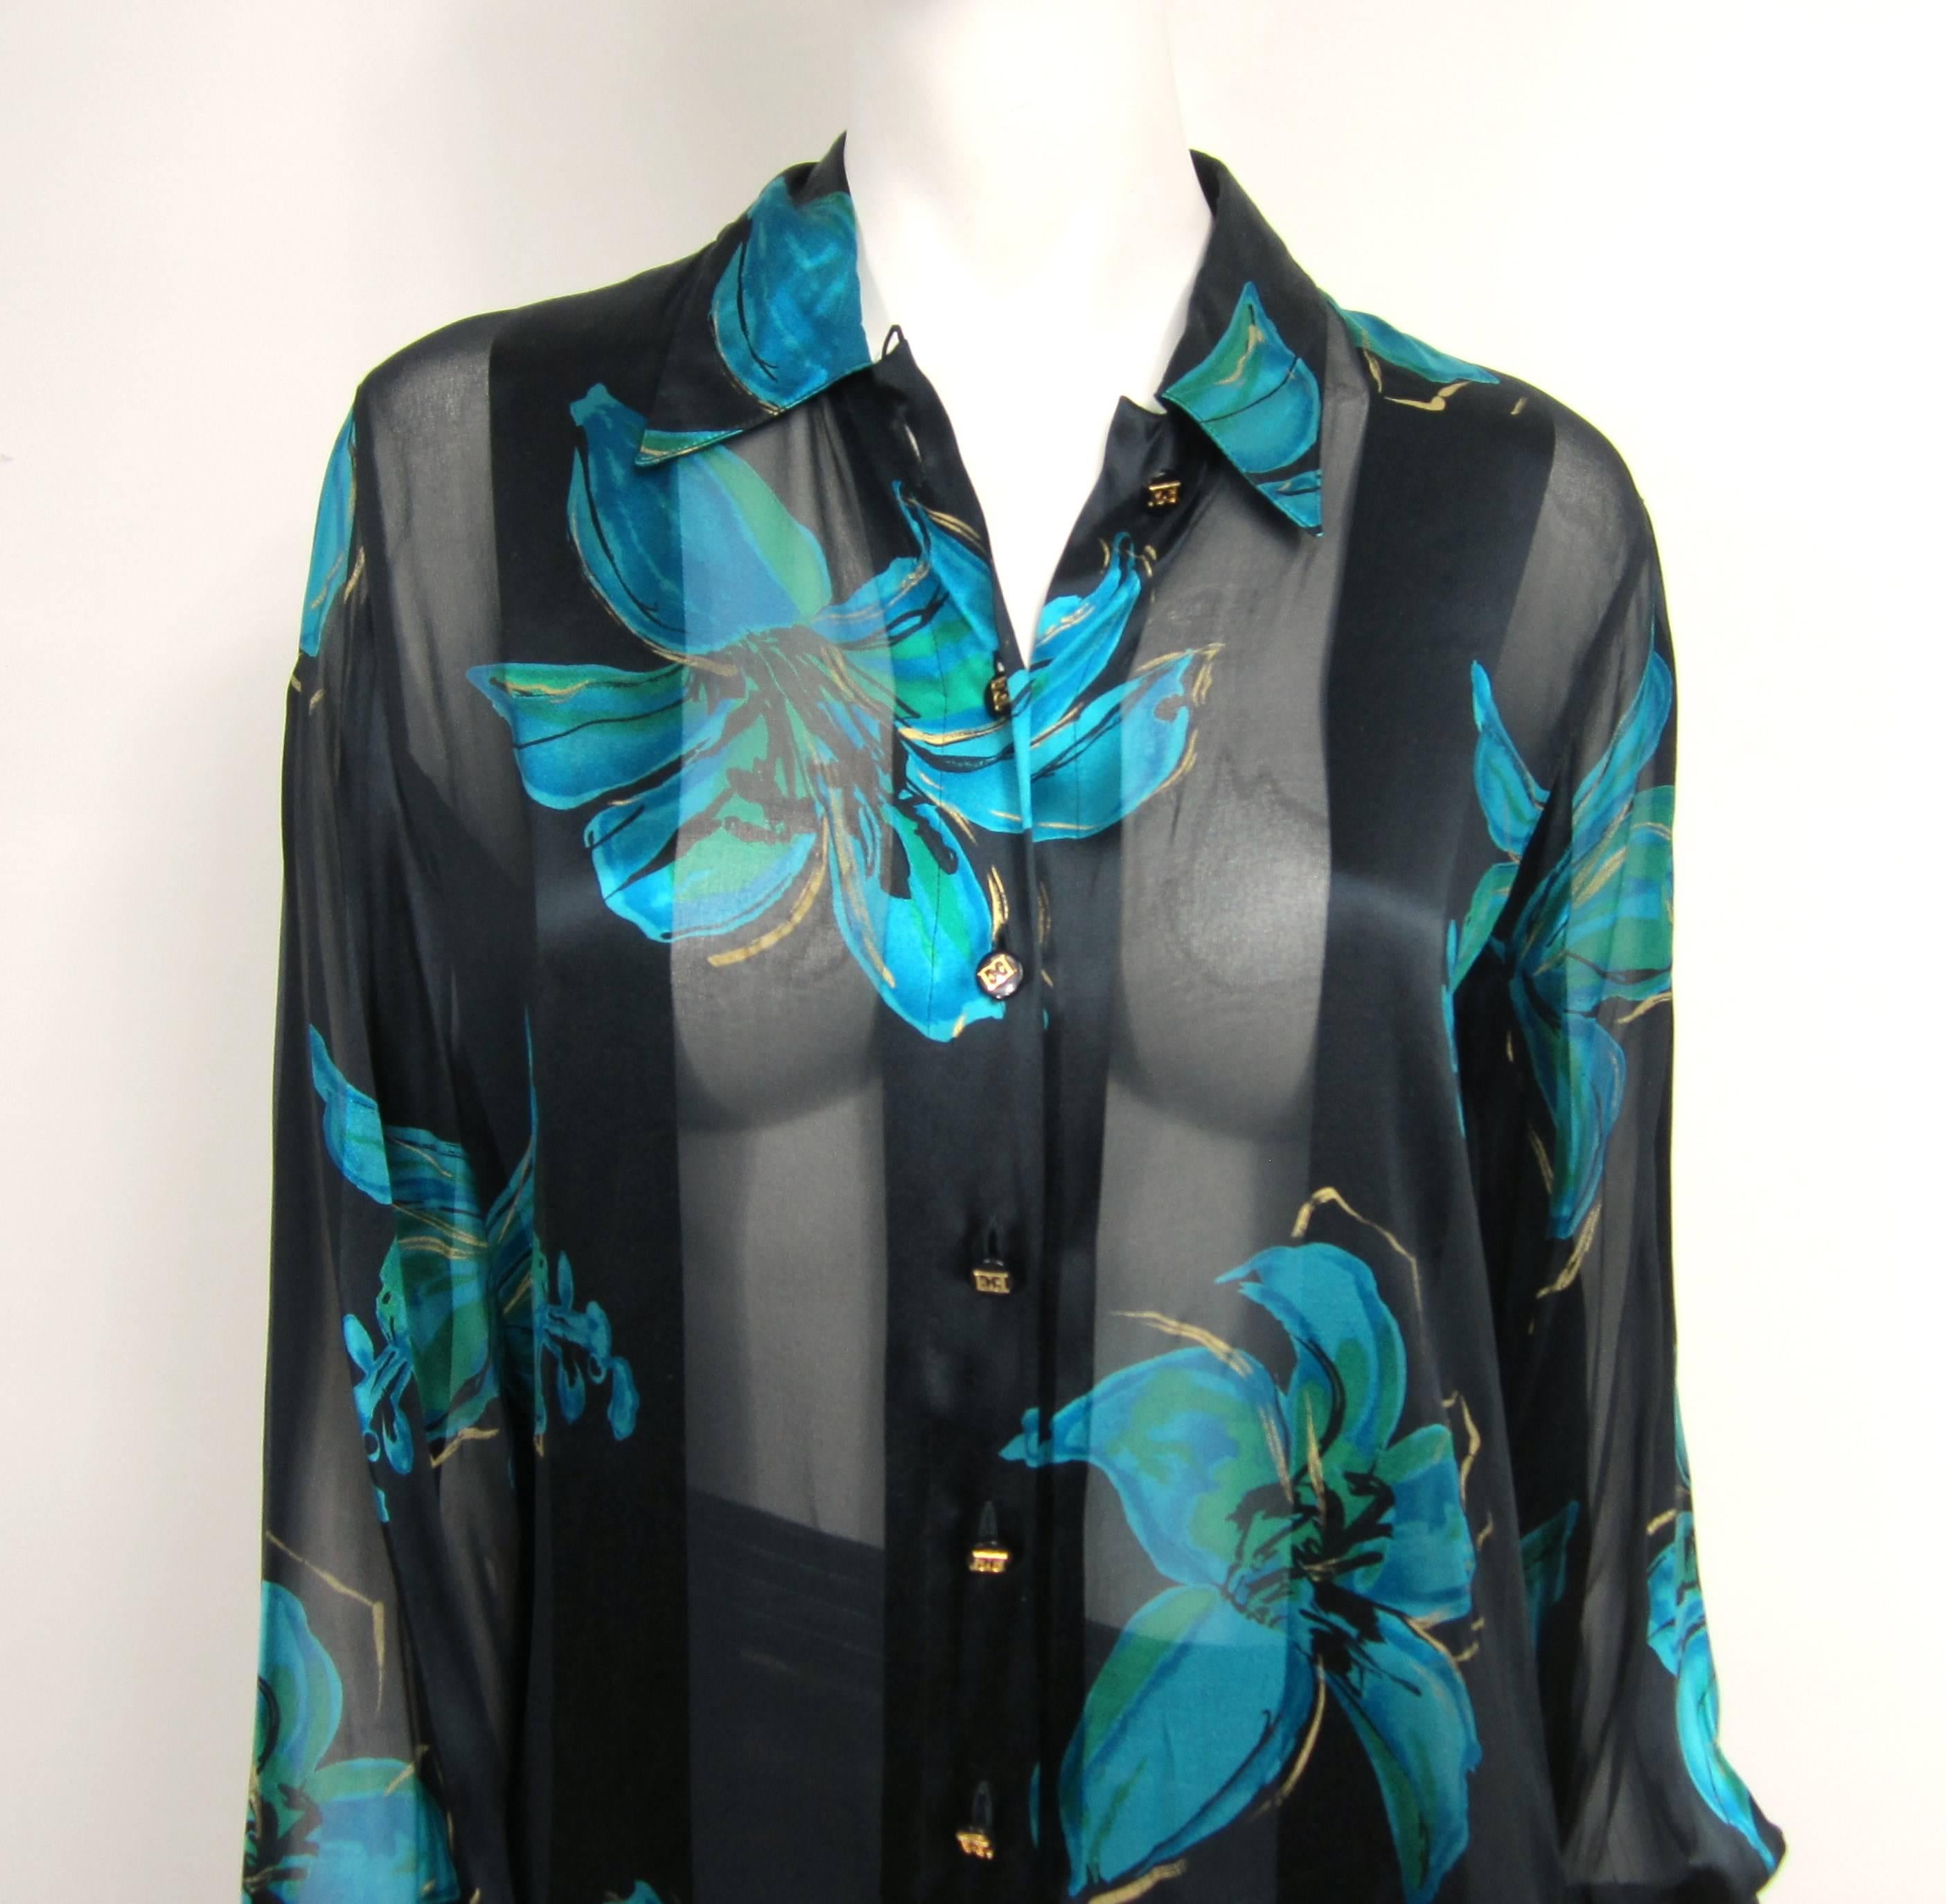 Escada Silk Blouse with Blue floral detailing. This is our of a massive collection of jewelry and clothing that was purchased in  the late 1980s early 90s, stored away and never worn. Check our store front as we have hundreds of items that are from